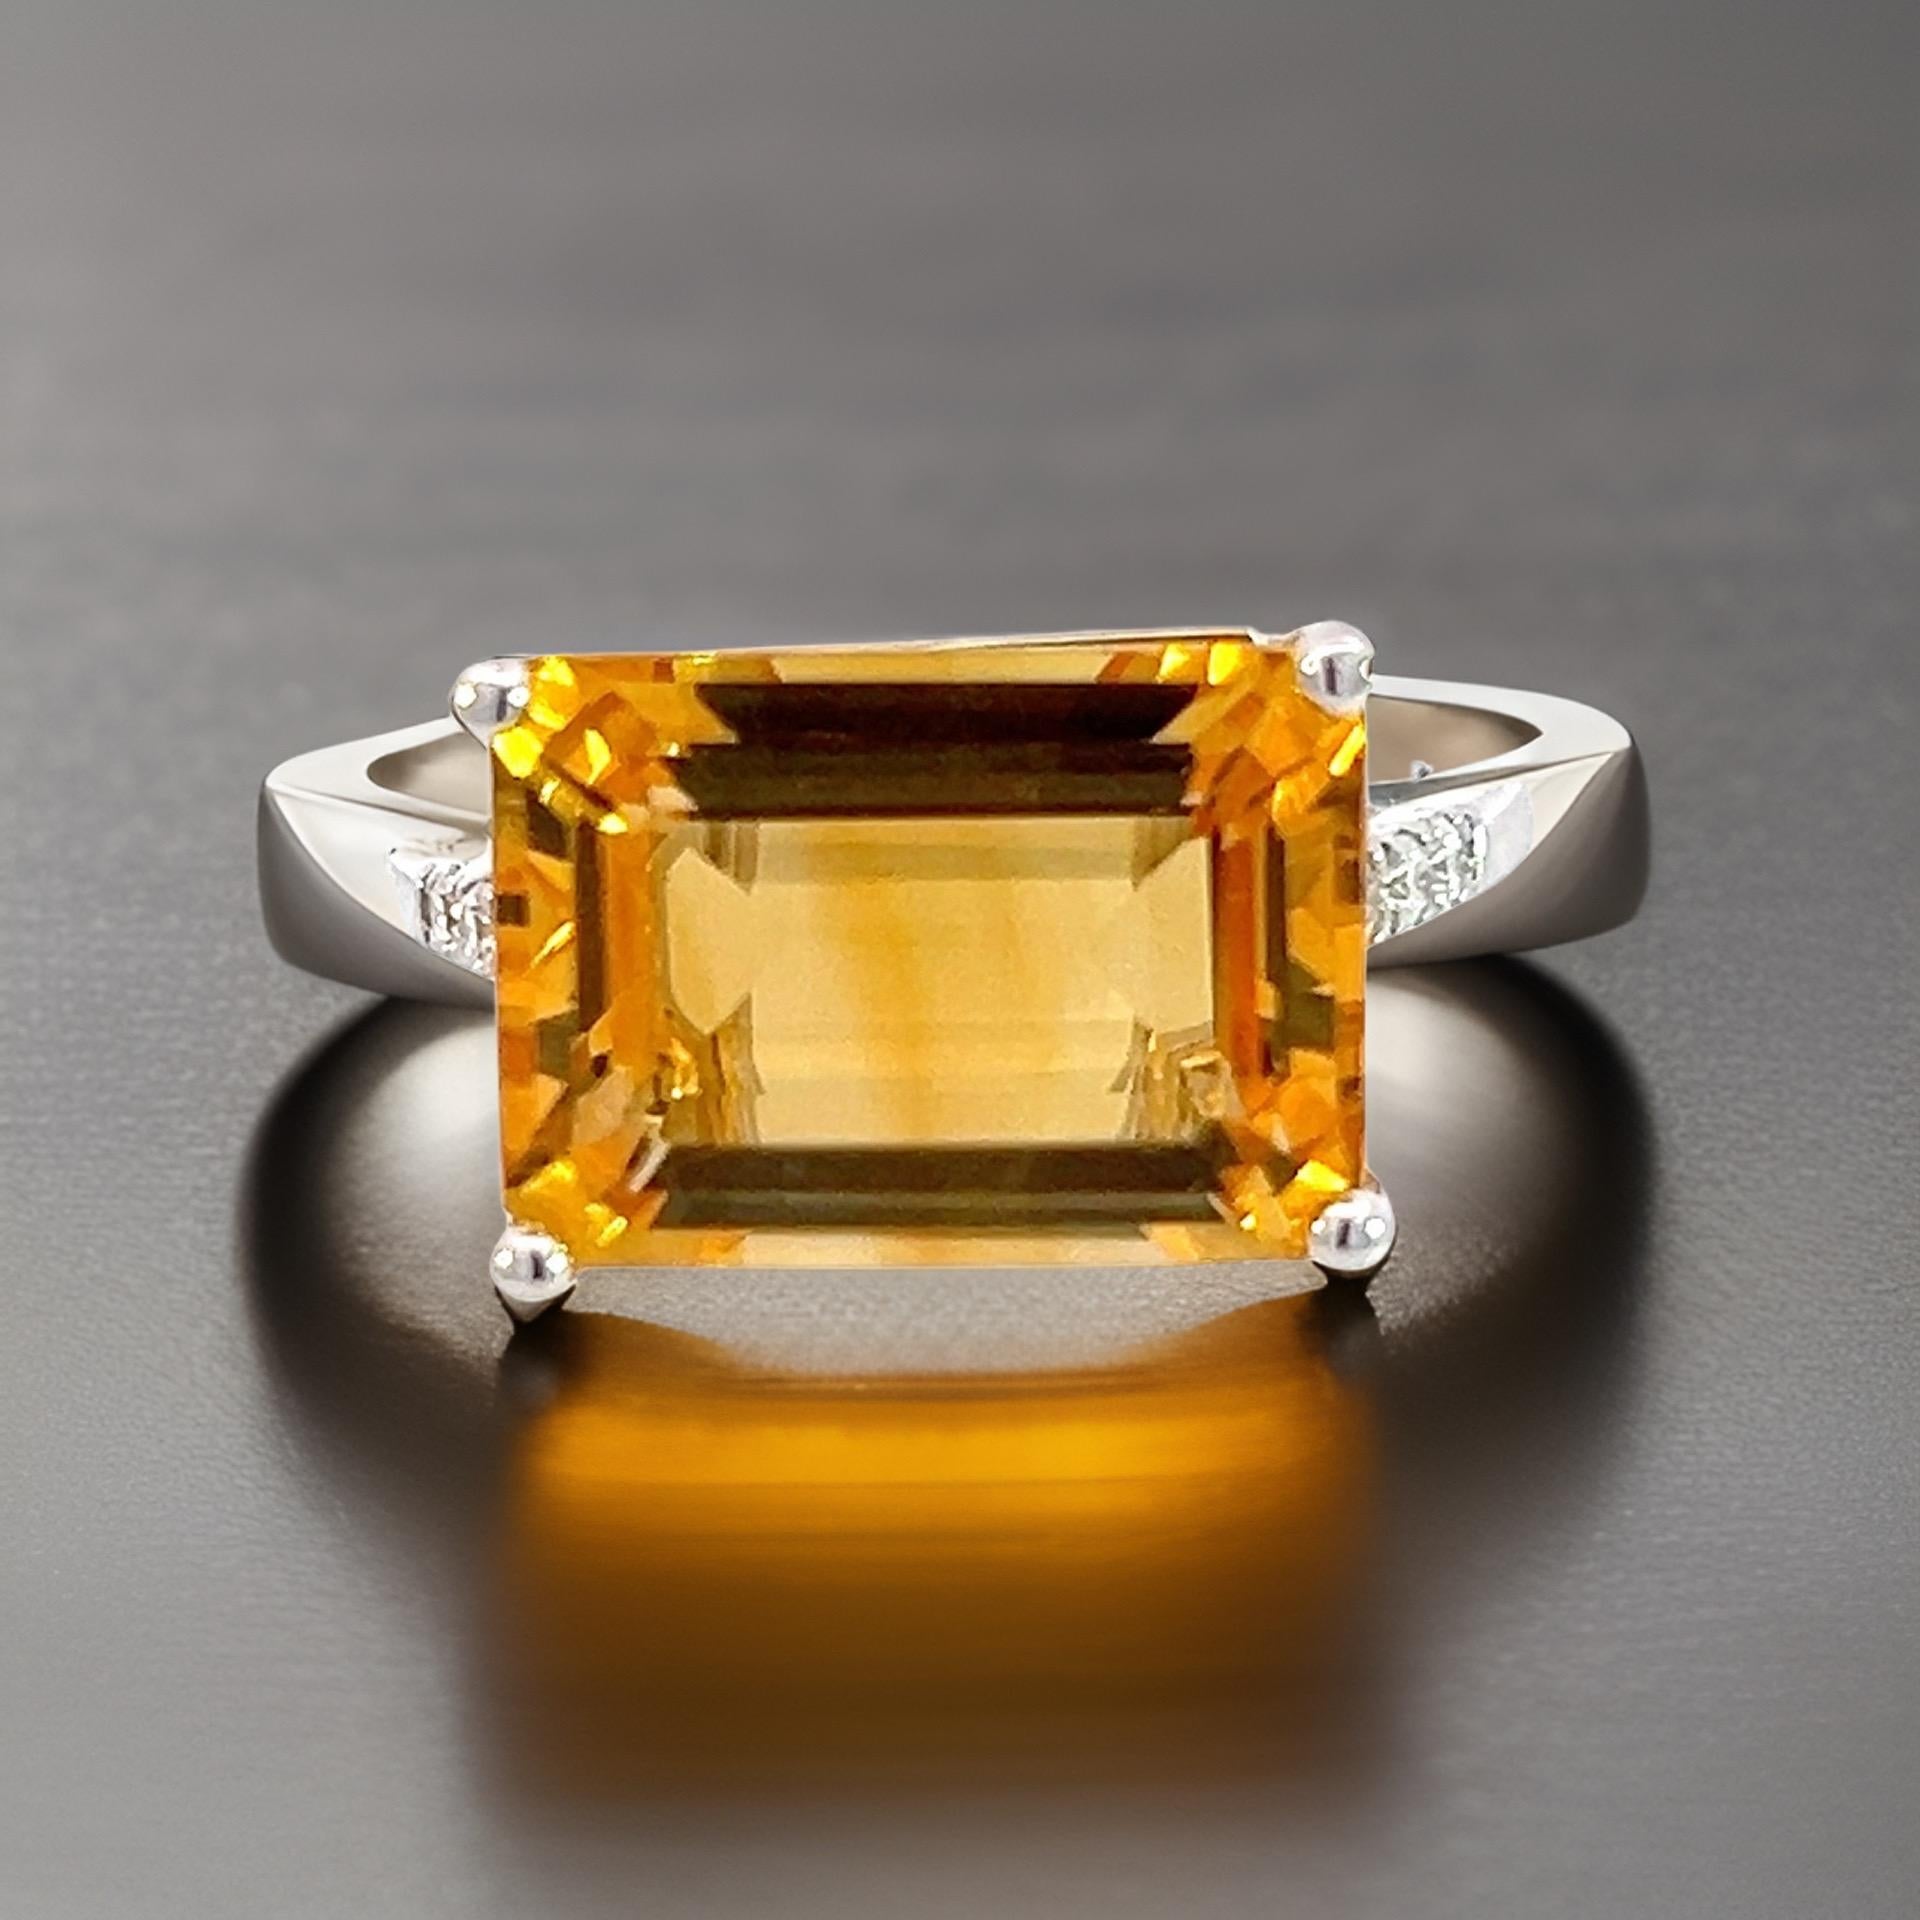 Emerald Cut Natural Citrine Diamond Ring 6.5 14k W Gold 7.01 TCW Certified For Sale